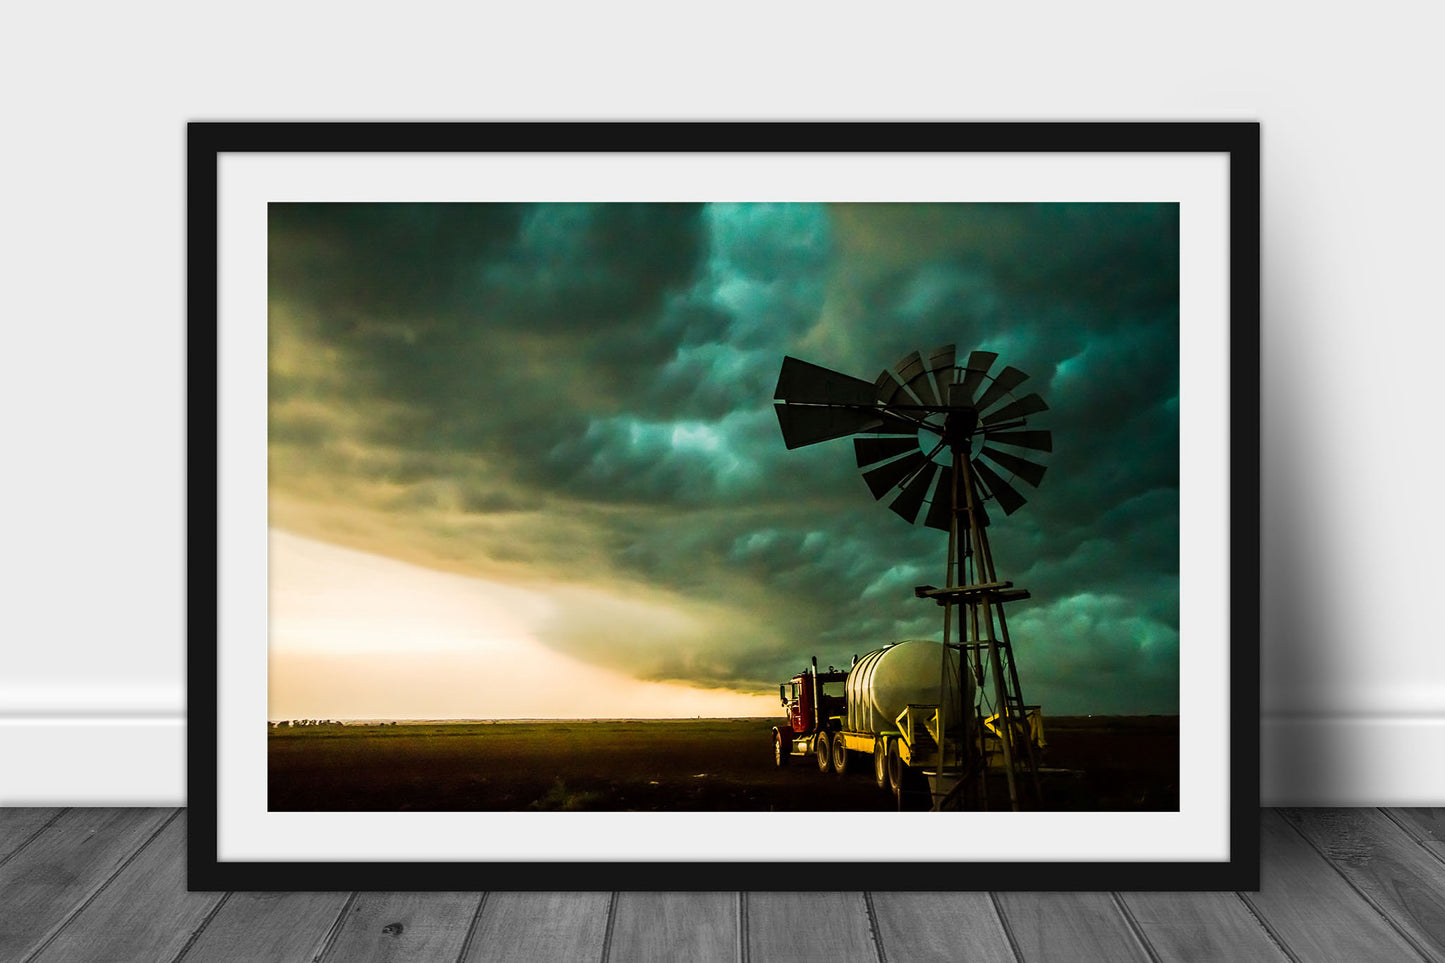 Framed and matted country photography print of an old windmill and water truck under advancing storm clouds on a stormy day on the plains of Oklahoma by Sean Ramsey of Southern Plains Photography.